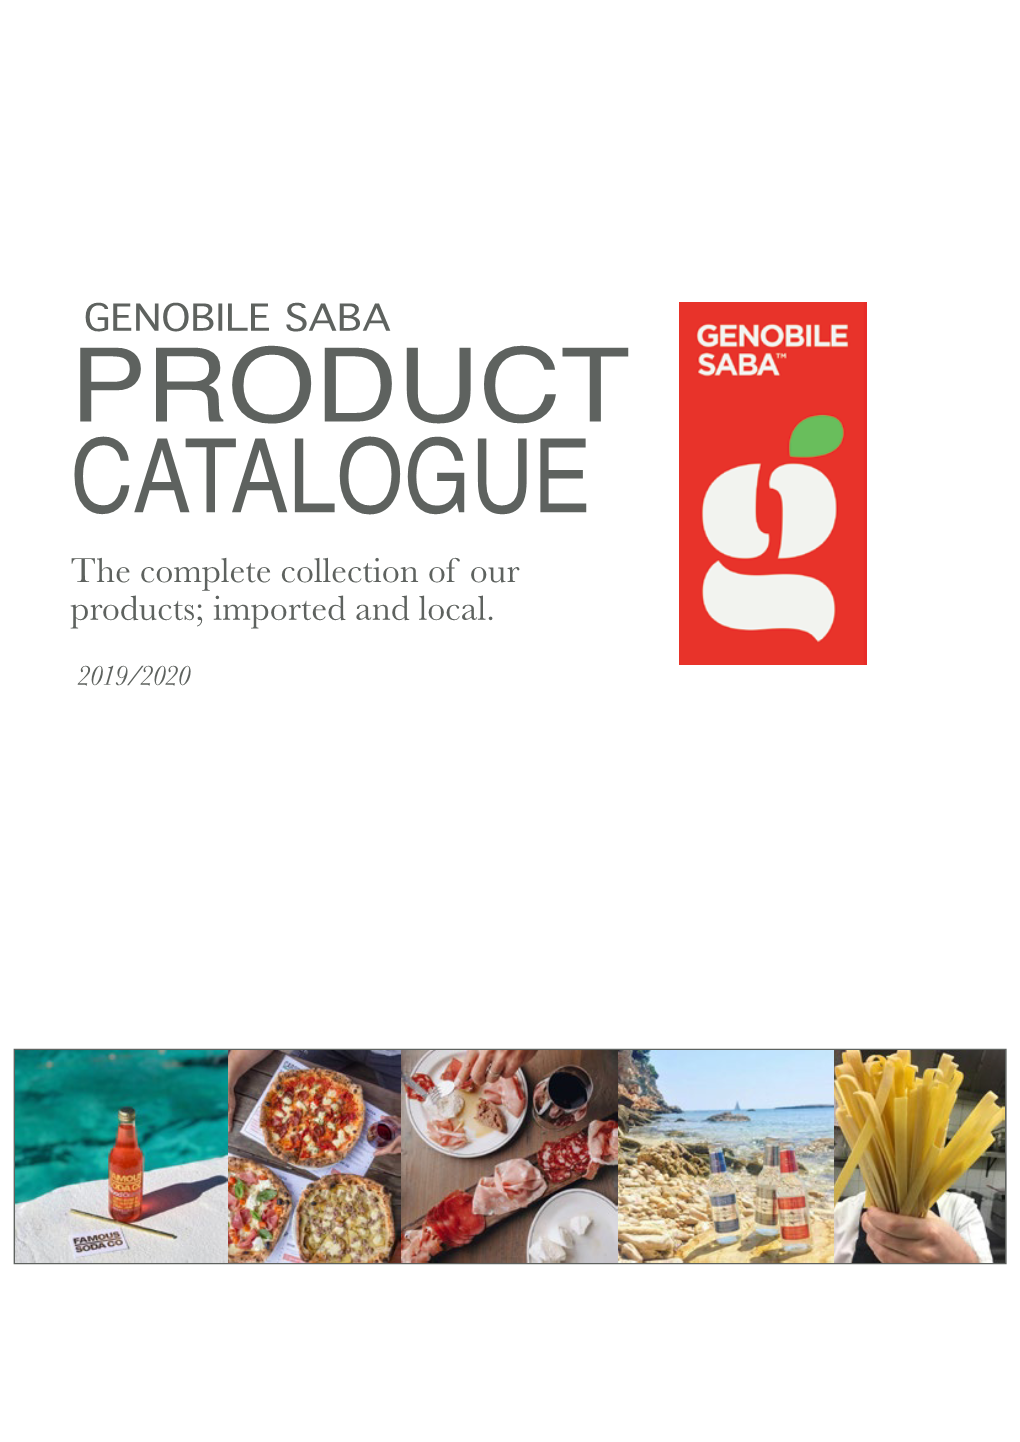 GENOBILE SABA PRODUCT CATALOGUE the Complete Collection of Our Products; Imported and Local